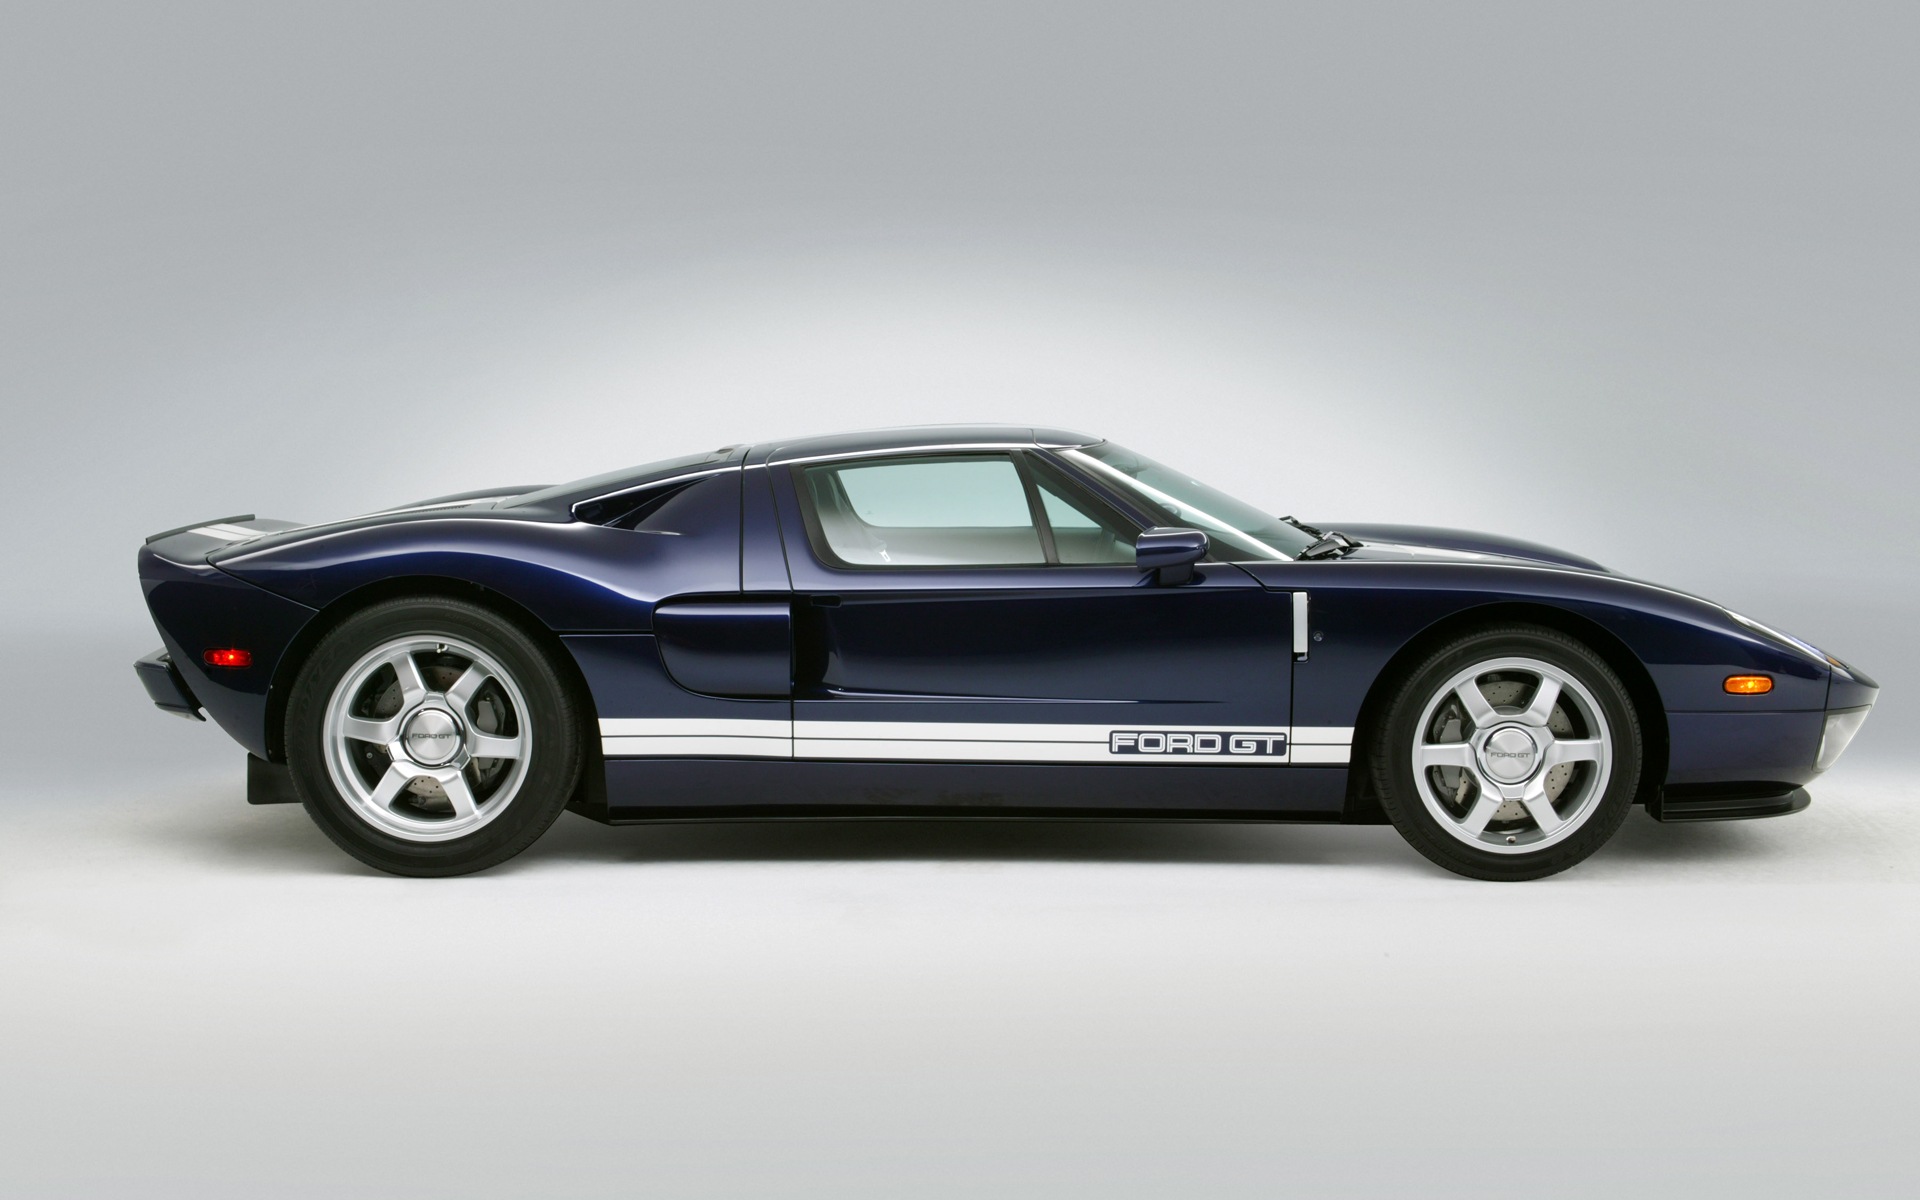 Wallpaper Automobile Ford Car Cars Auto High Resolution Gt